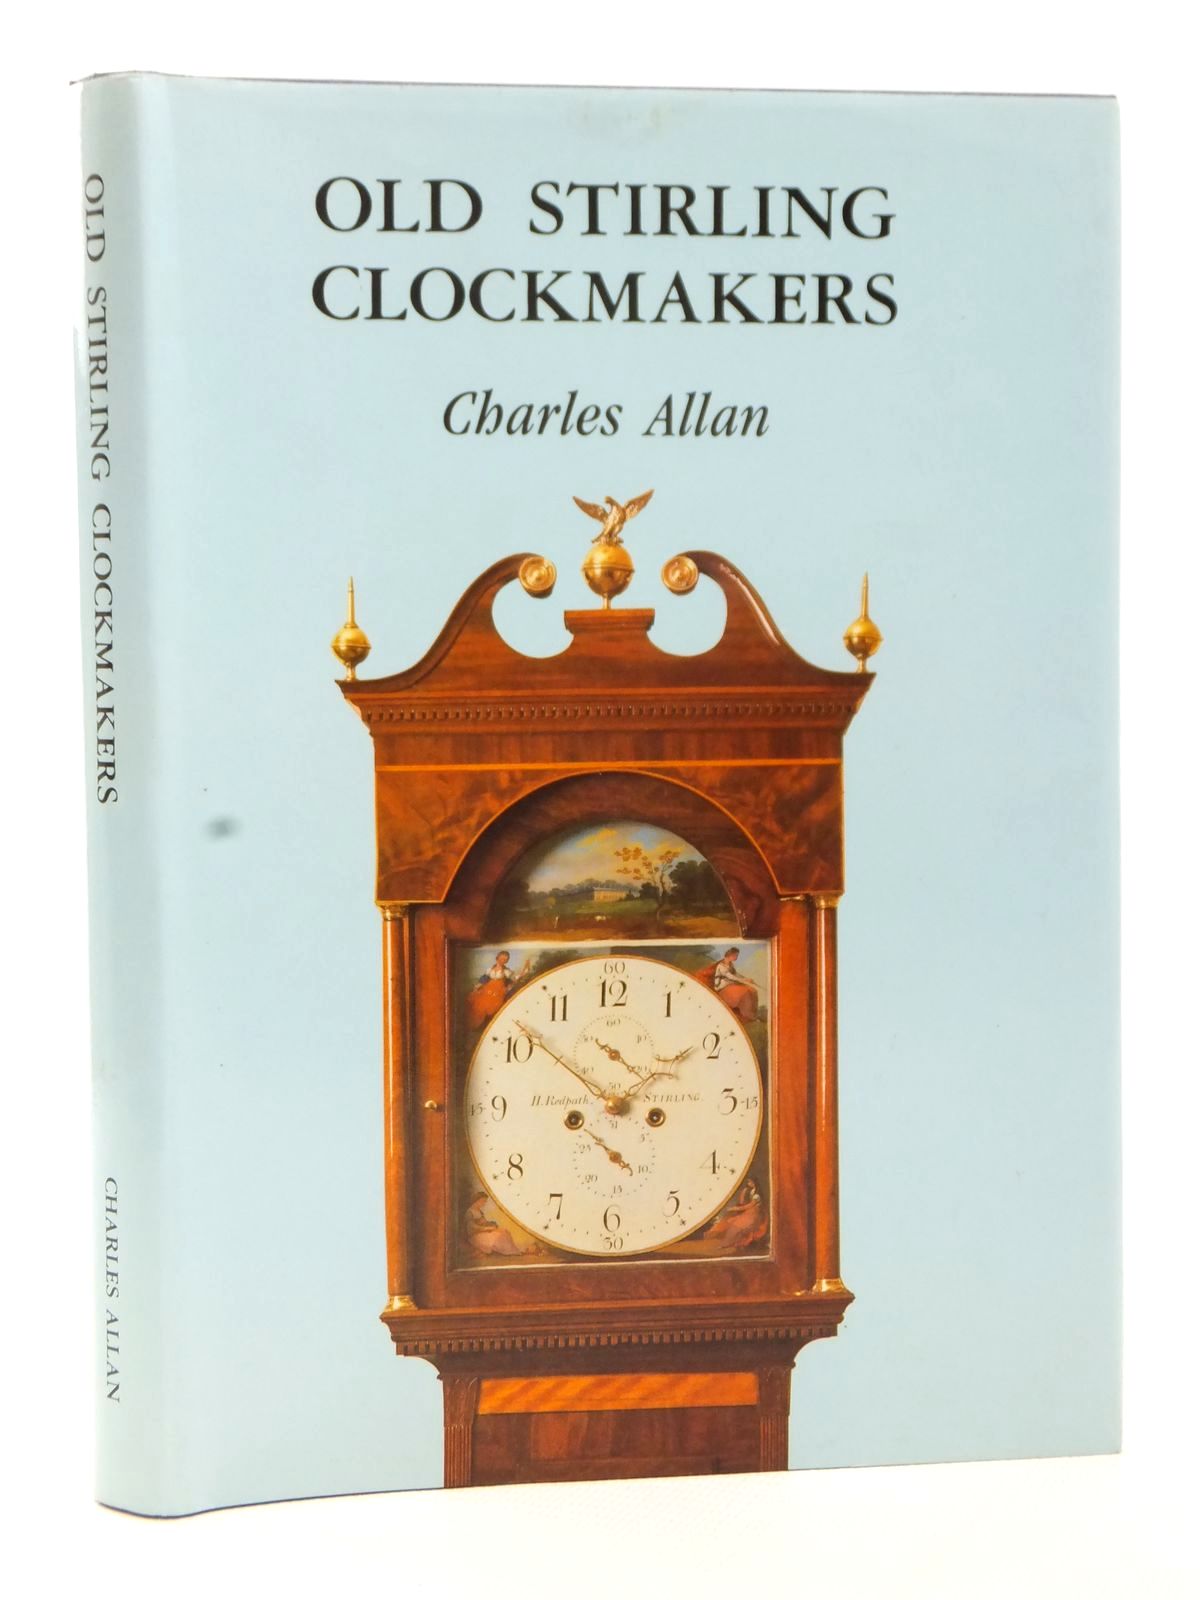 Old Stirling Clockmakers